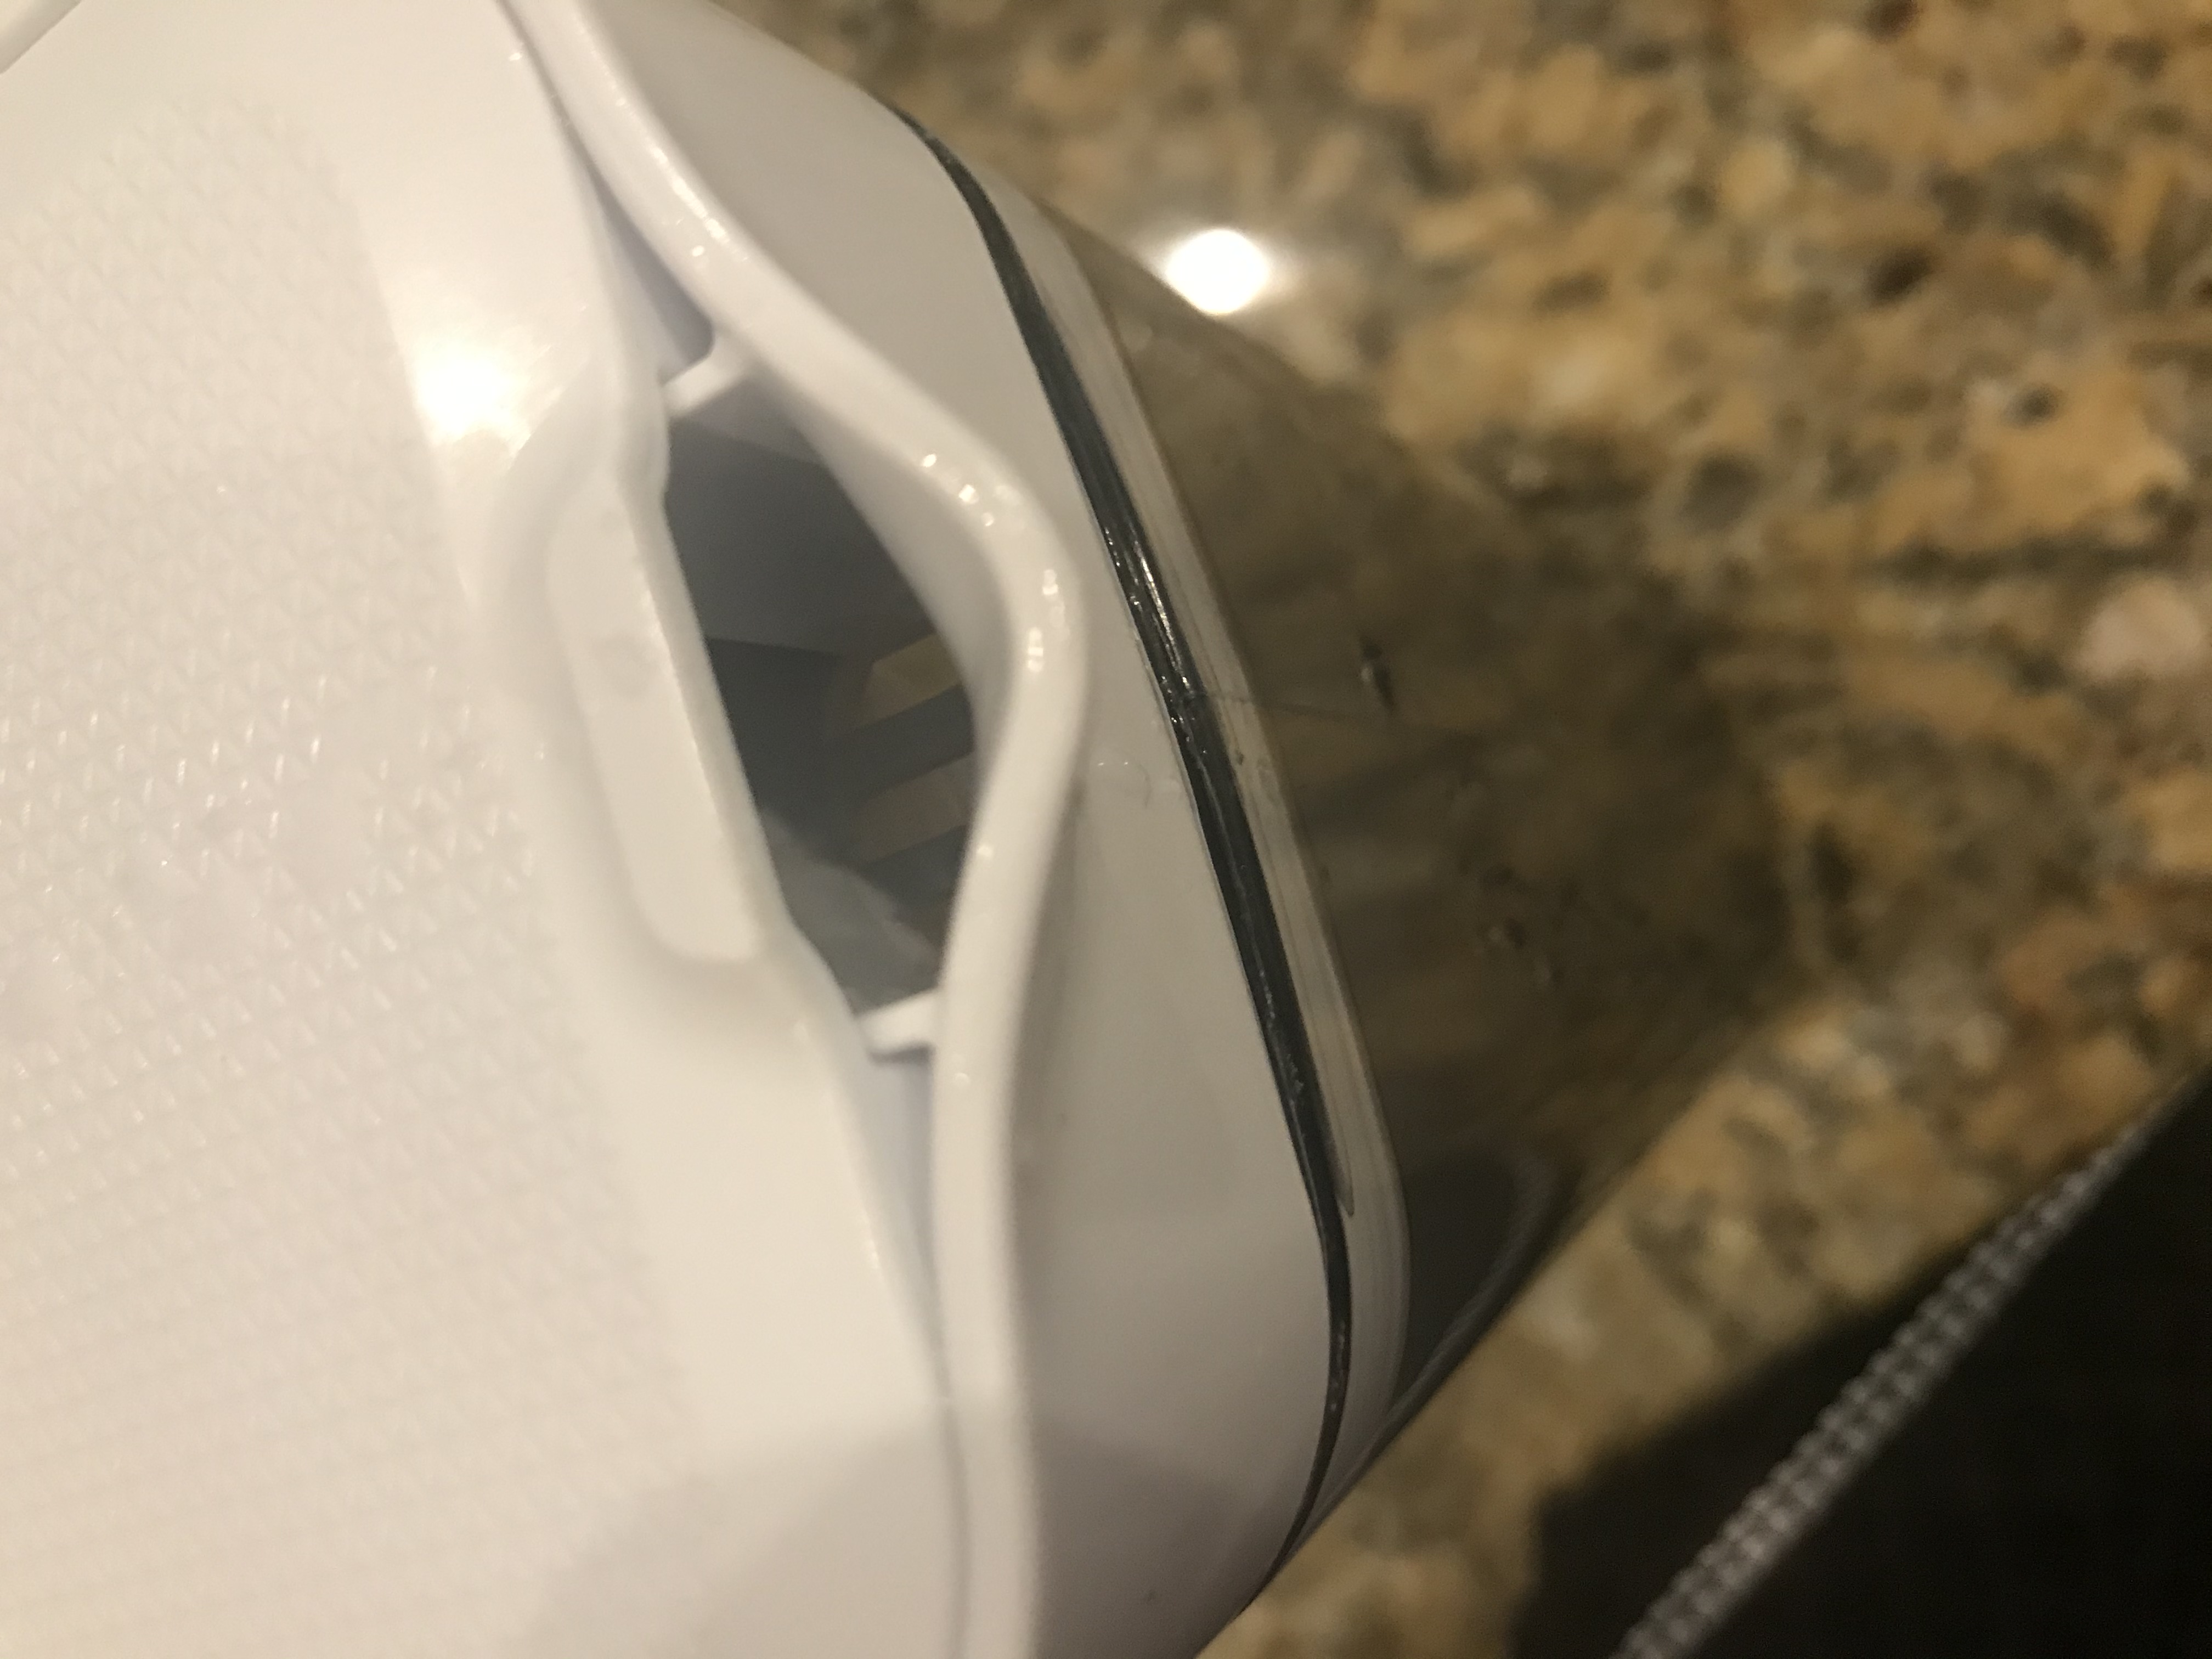 Solved: Refrigerator auto-fill water pitcher leaks - Page 23 - Samsung ...